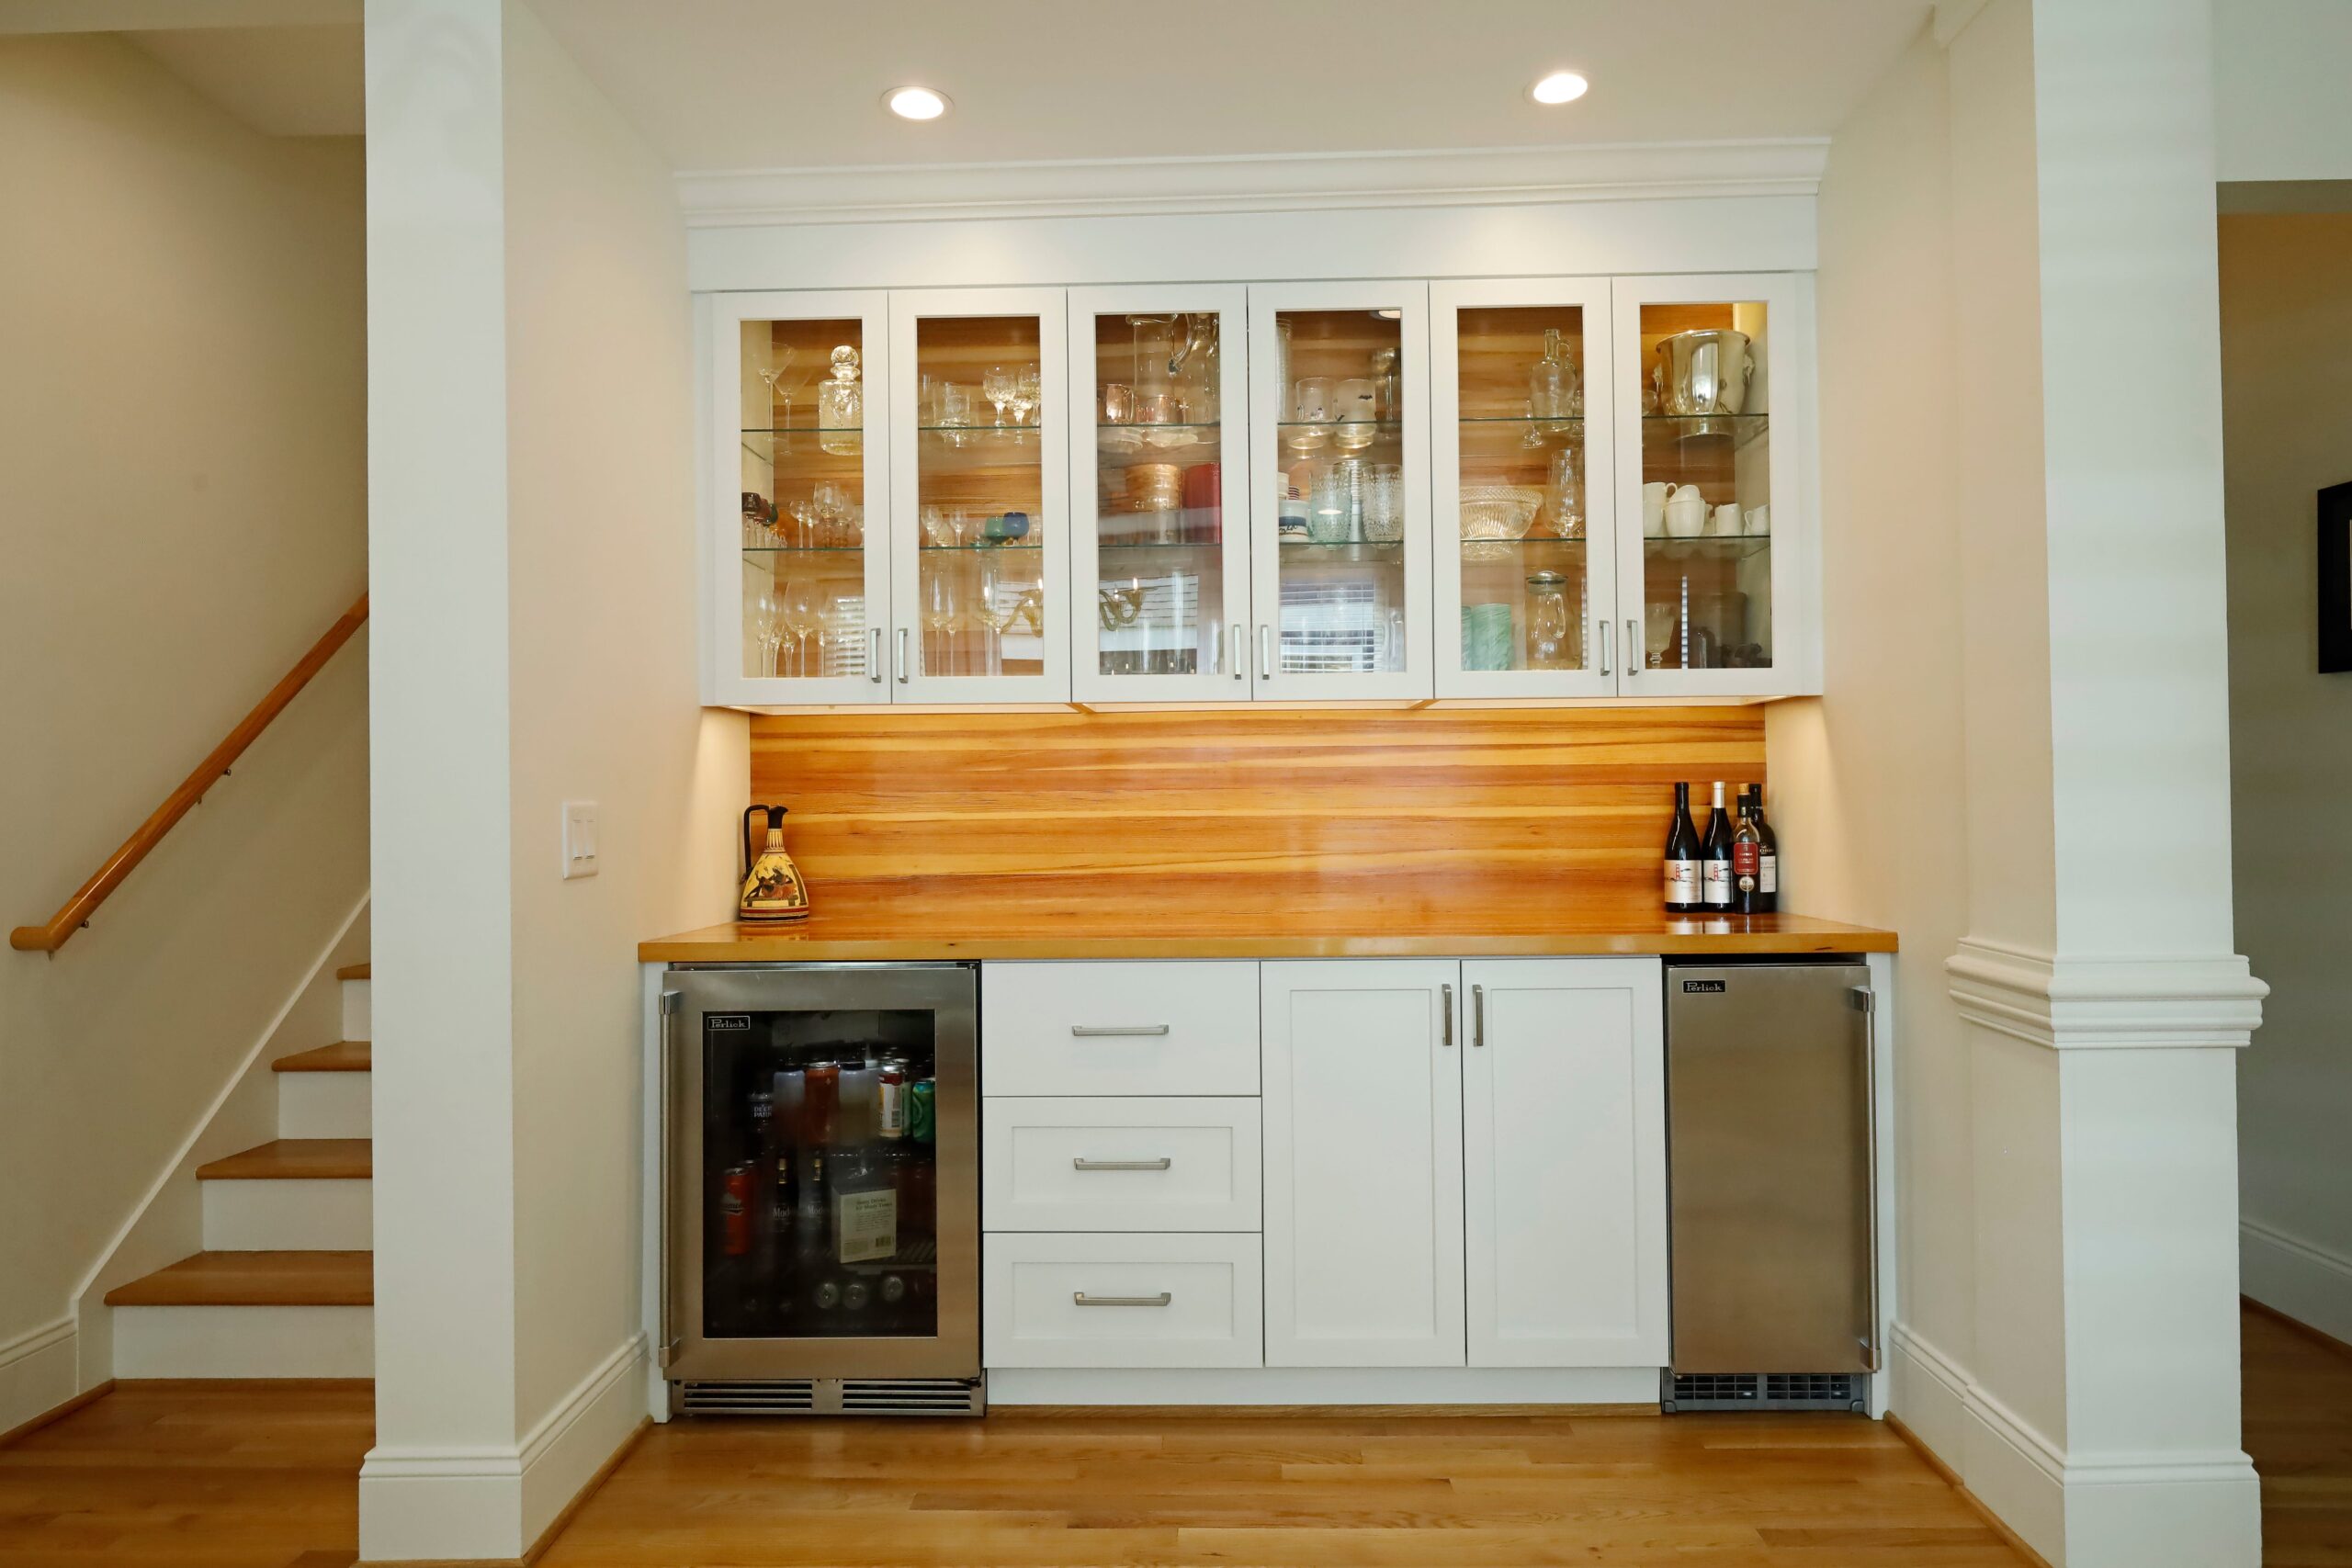 A built-in bar with glass-front cabinetry, under-counter fridge and ice-maker, and custom heart-pine countertops and wall finish.